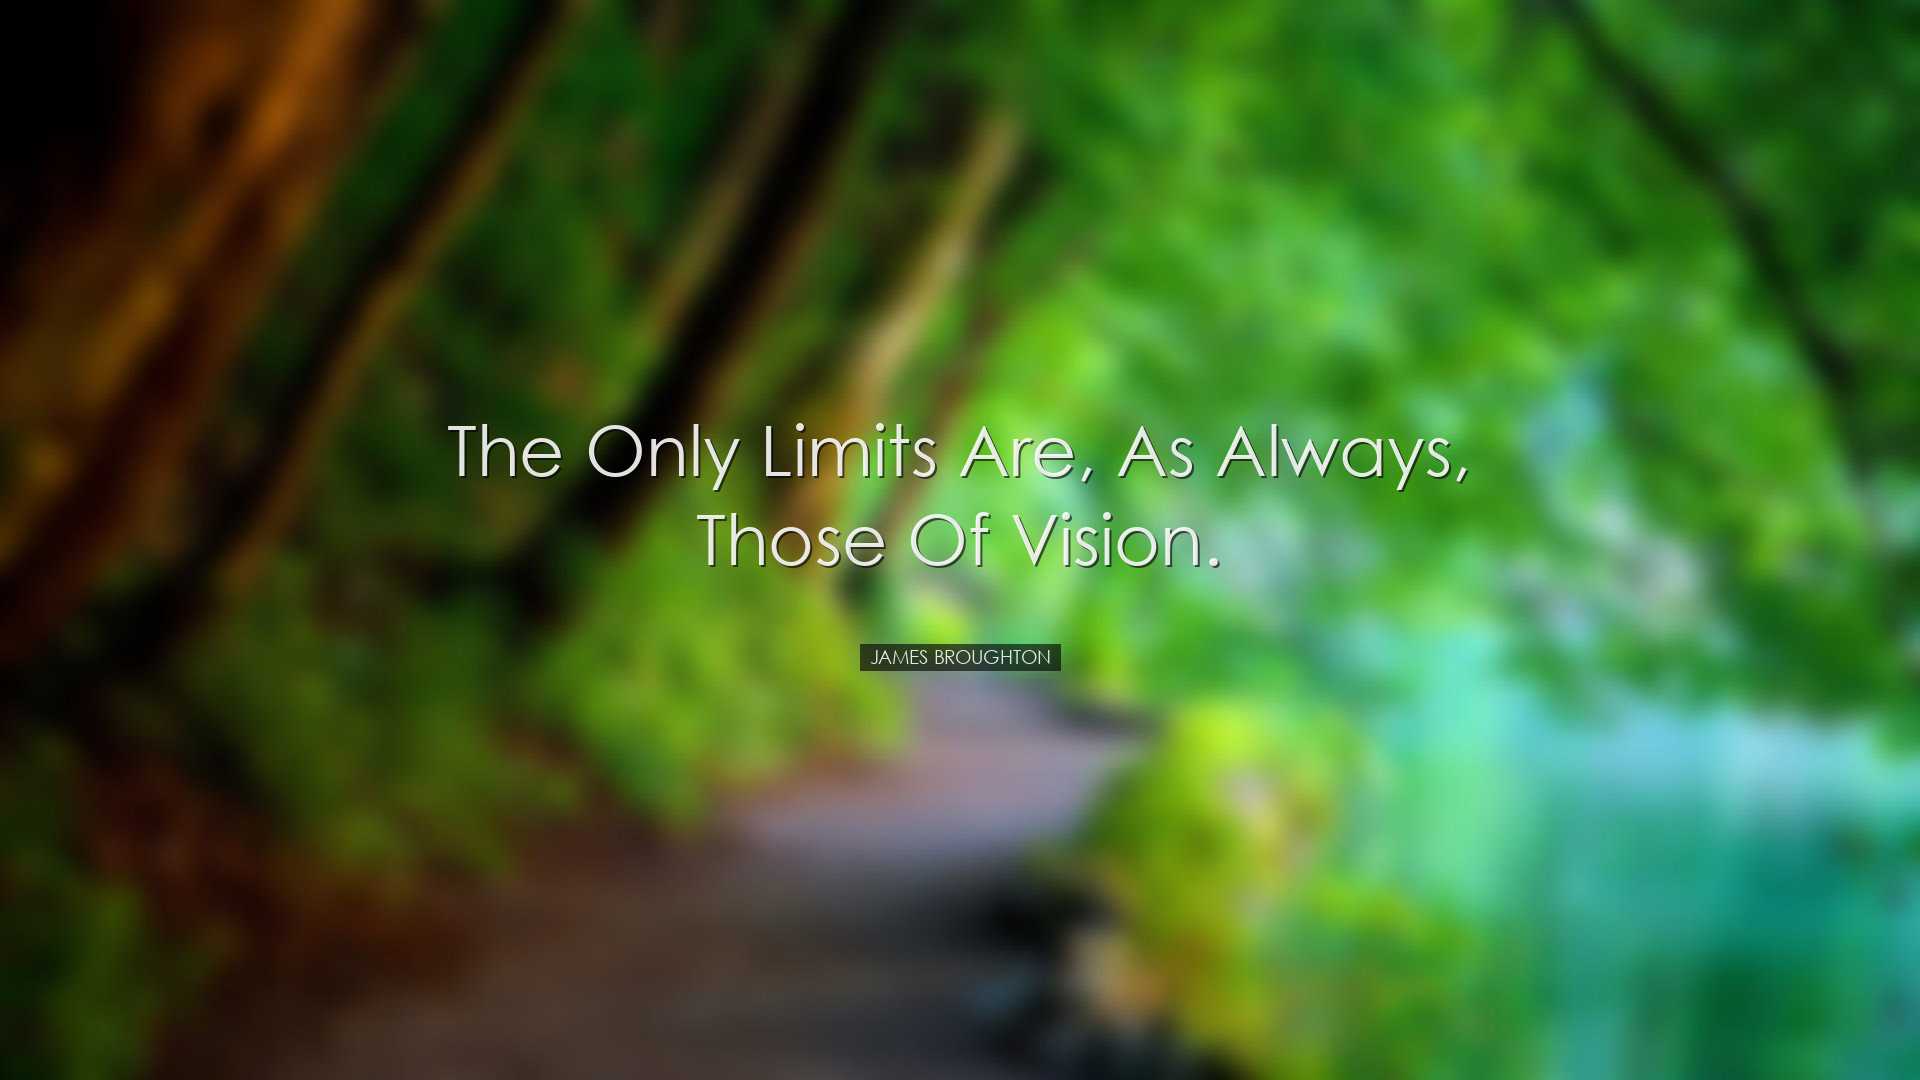 The only limits are, as always, those of vision. - James Broughton